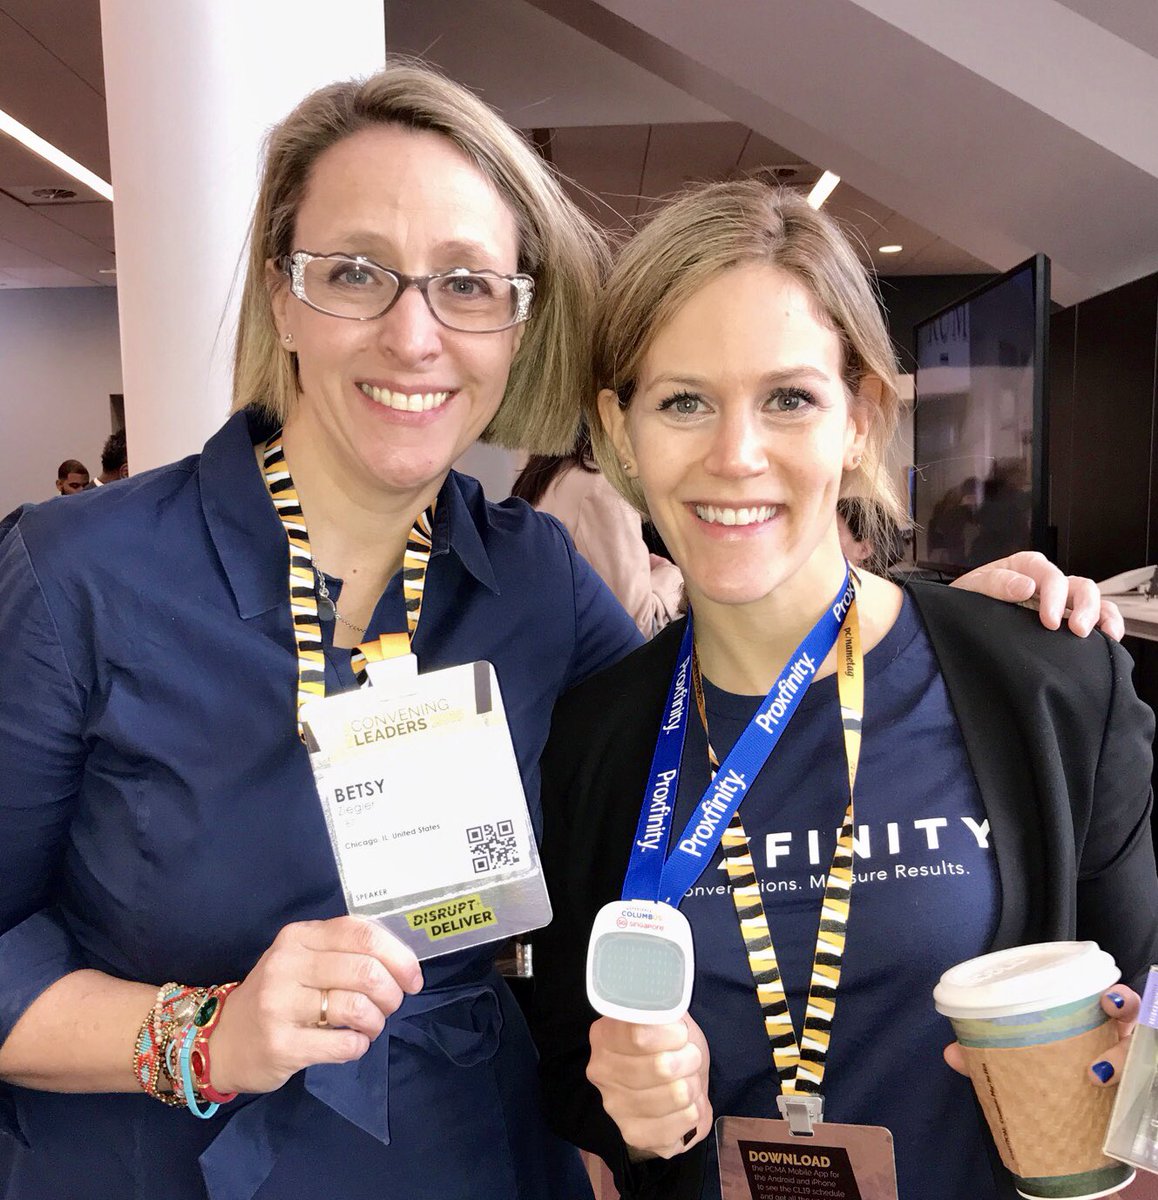 So I’m @pcmahq #pcmacl THE event for event profs thinking that @1871Chicago Member @Proxfinity CEO @LisaCarrel needs to be here and then poof I hear my name being called and she IS here! Her business solving for a key pain point- human connection at events is blowing up!